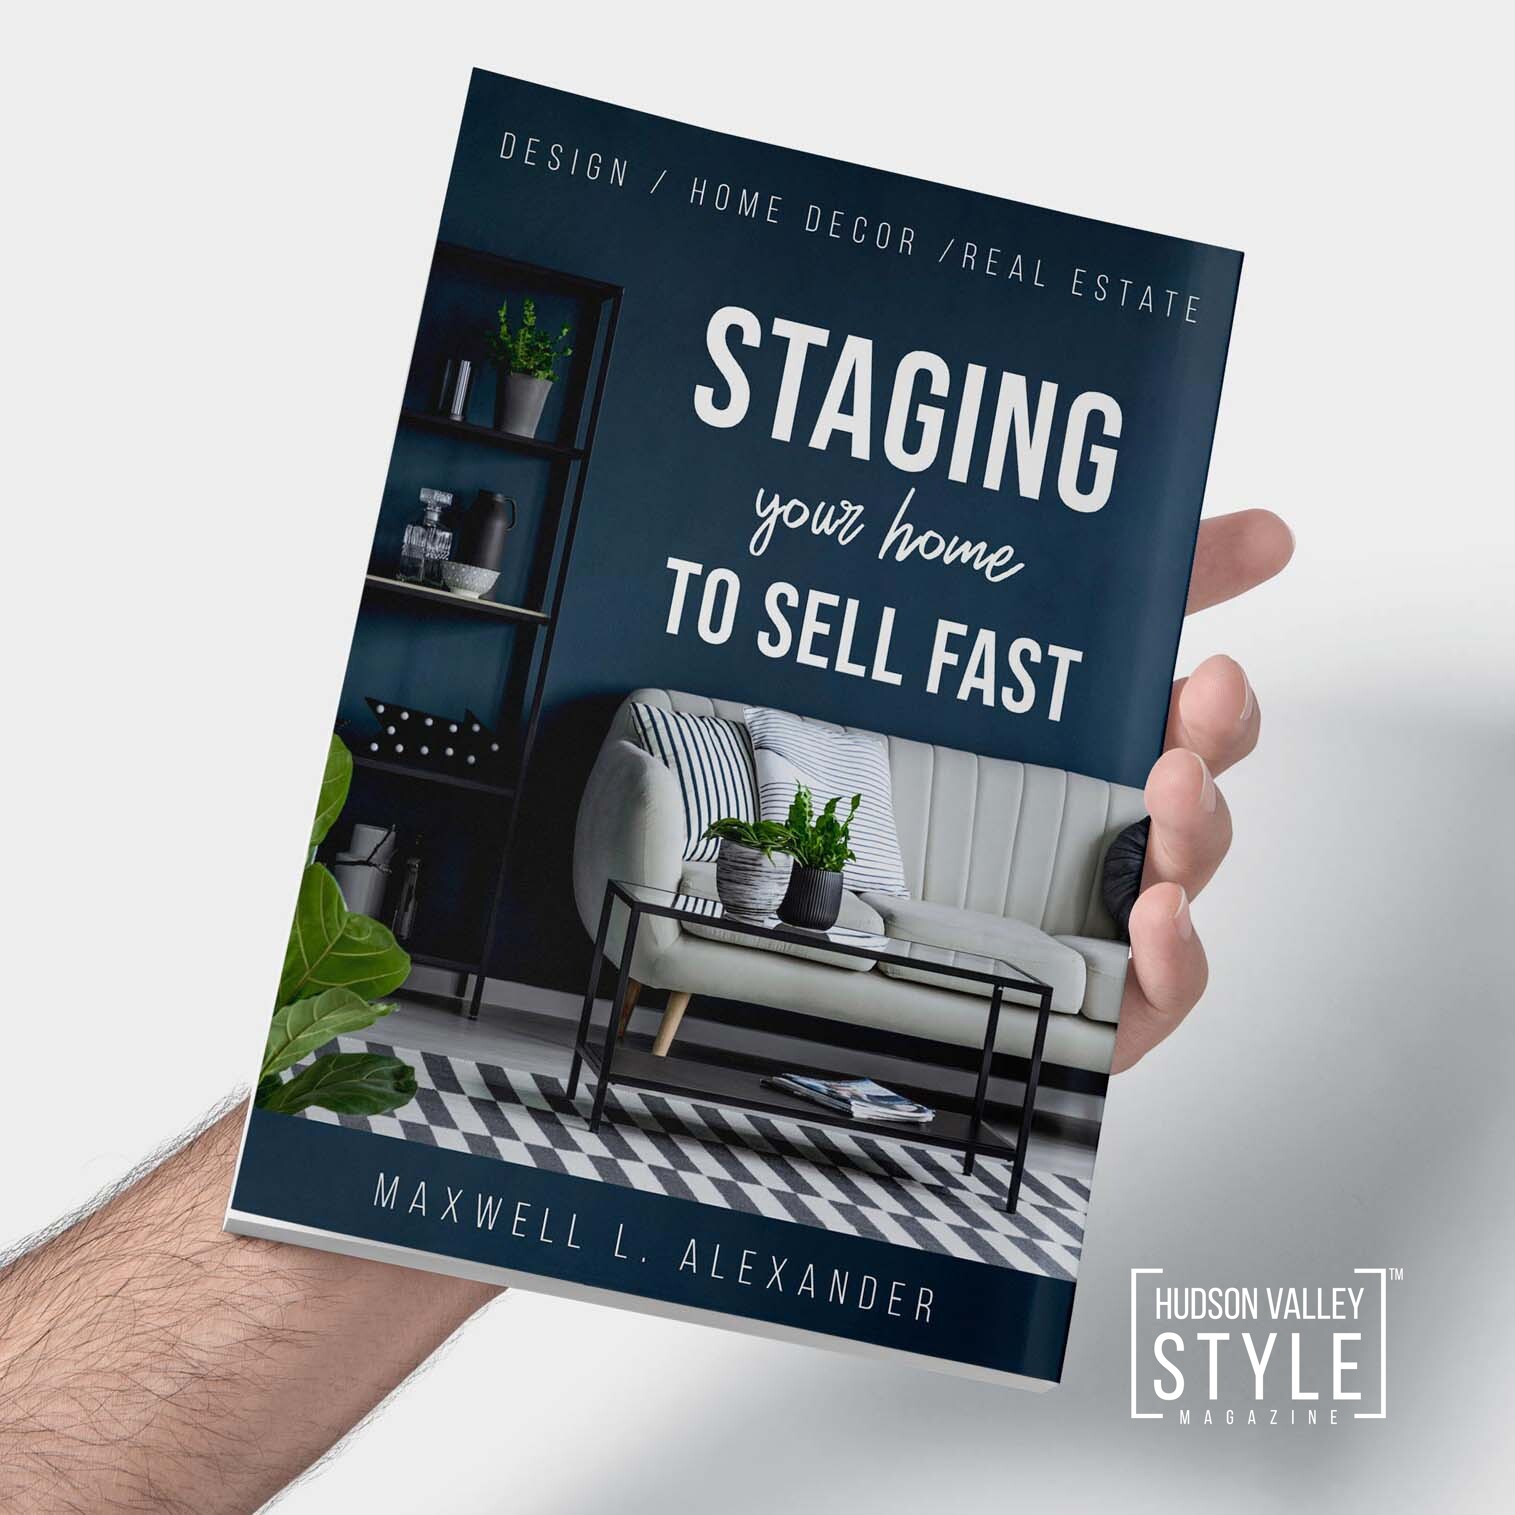 Staging Your Home to Sell Fast - New Book by Maxwell L. Alexander